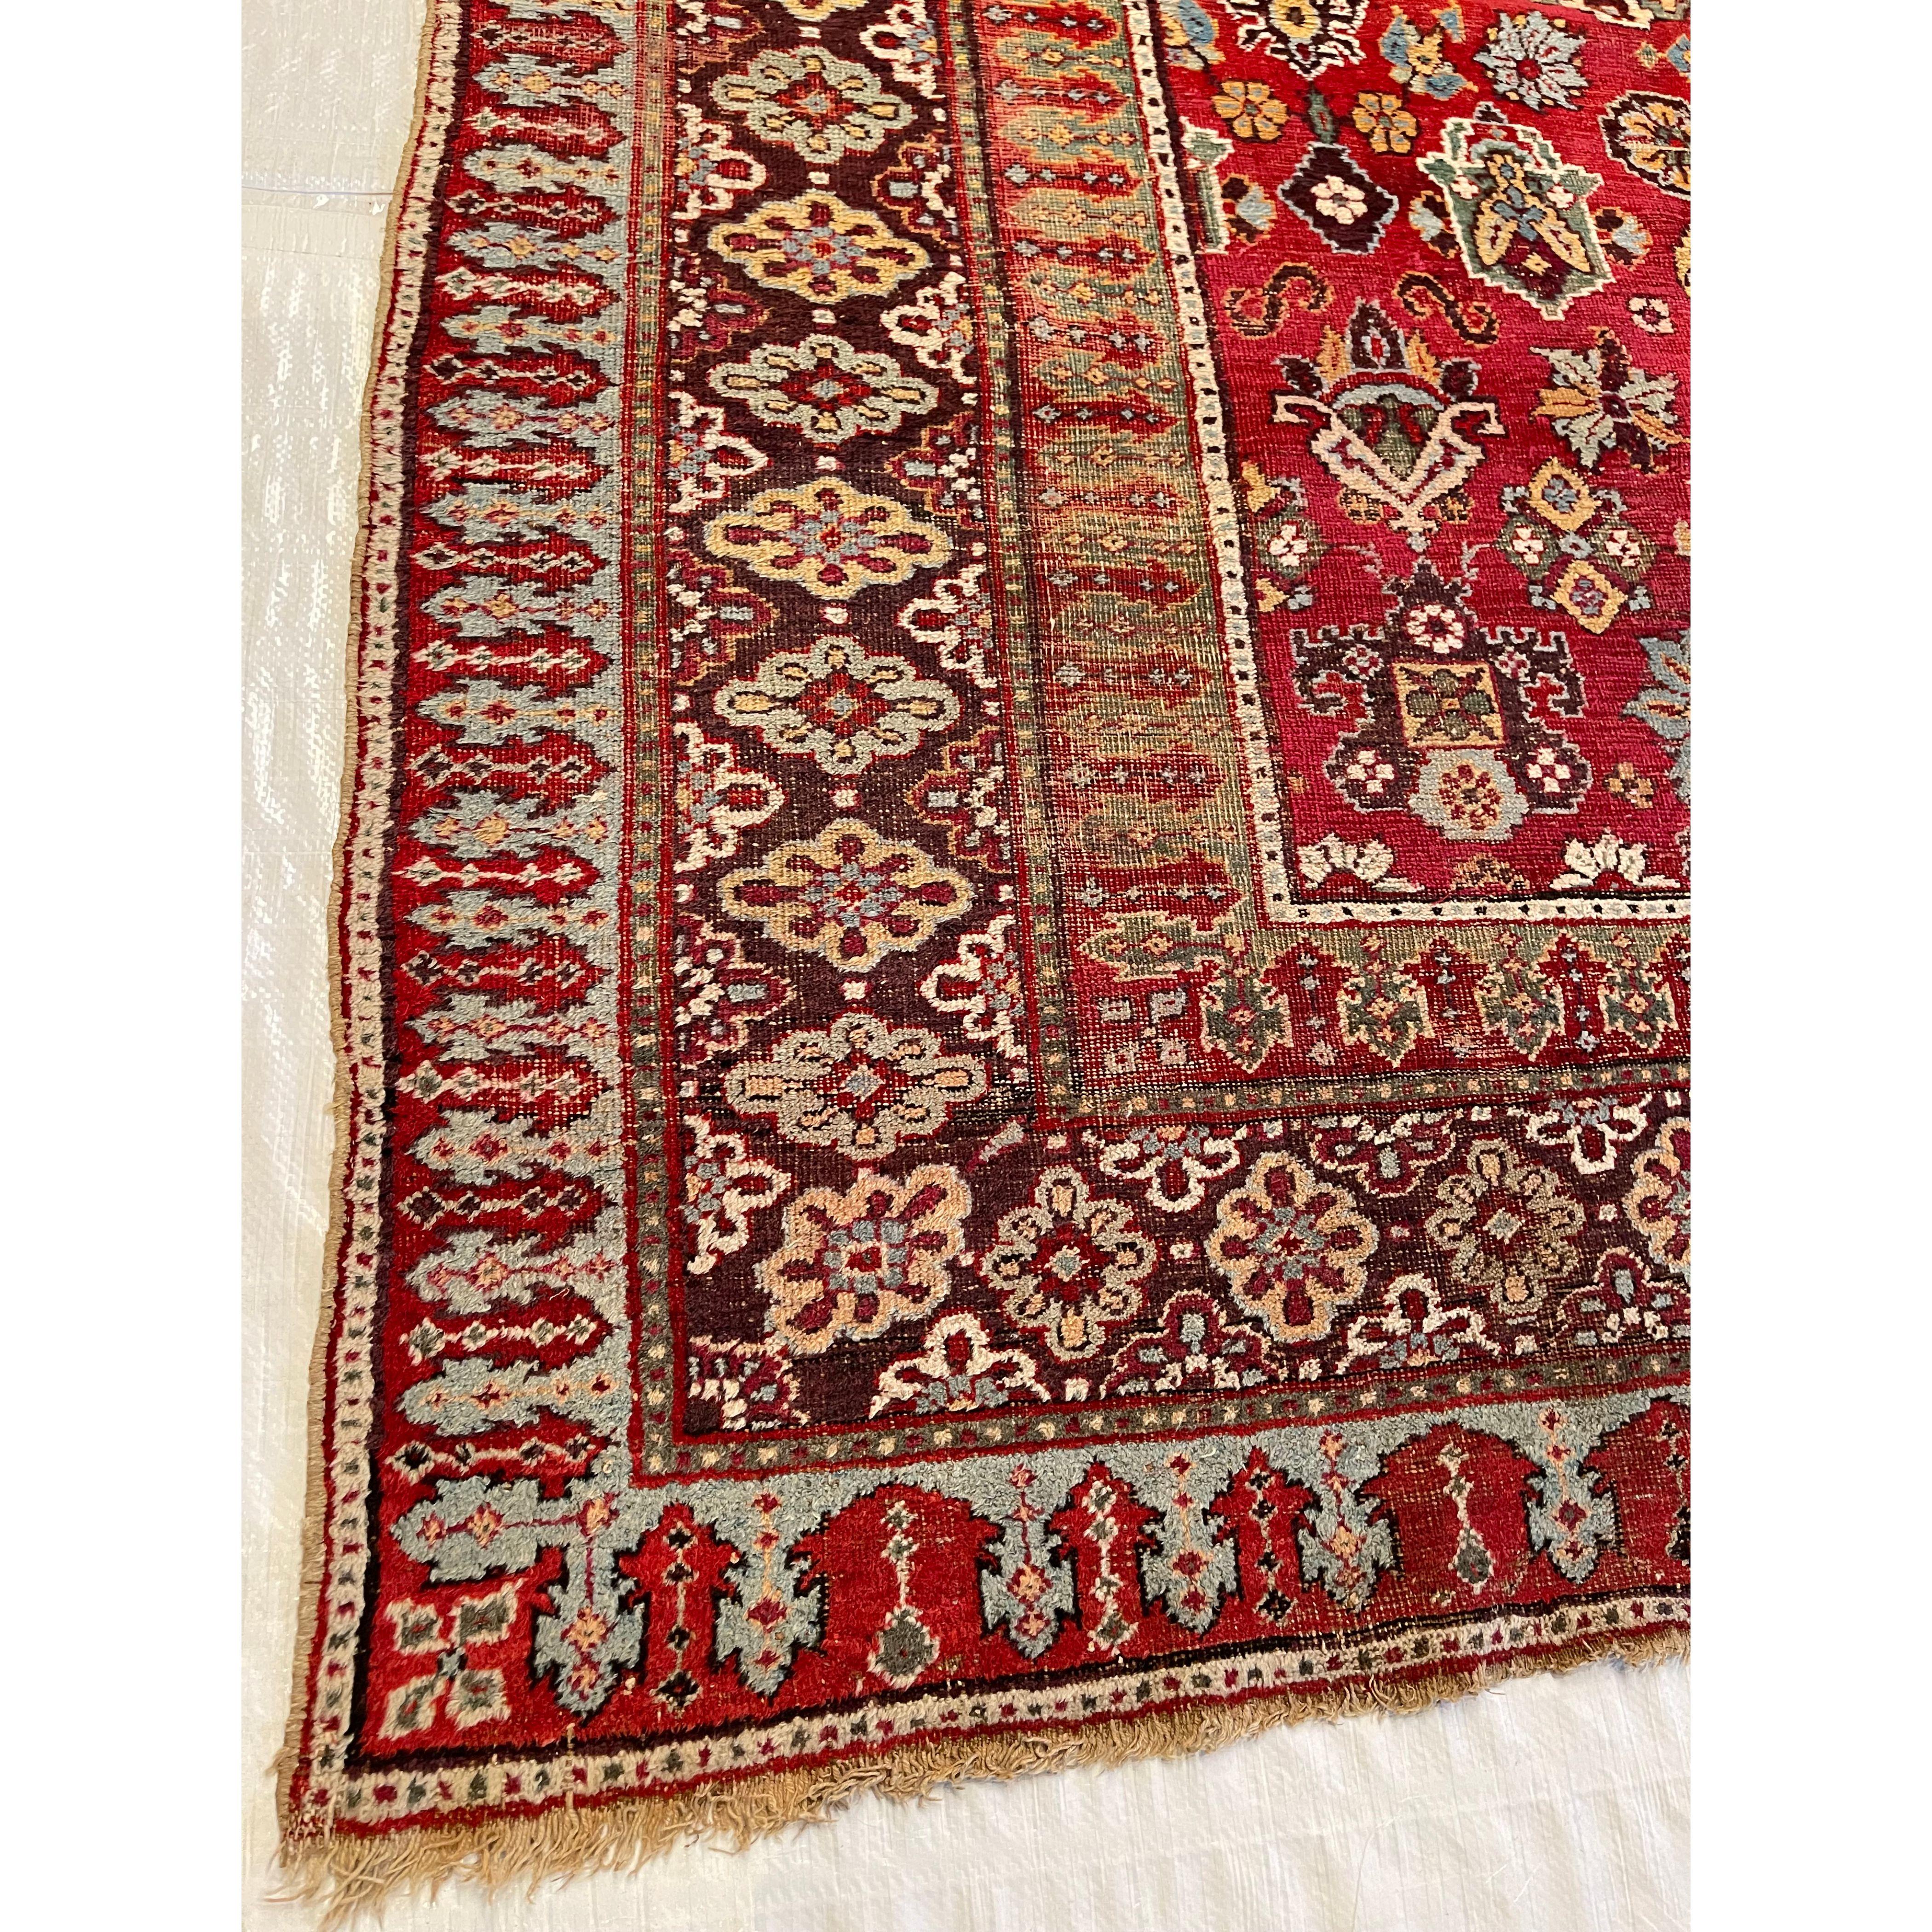 Antique Amritsar Rugs:
-
The spectacular rugs of Amritsar capture the exotic style of India while incorporating a subtle colonial influence. This convergence of eastern and western styles results in an exceptionally alluring appearance that has been